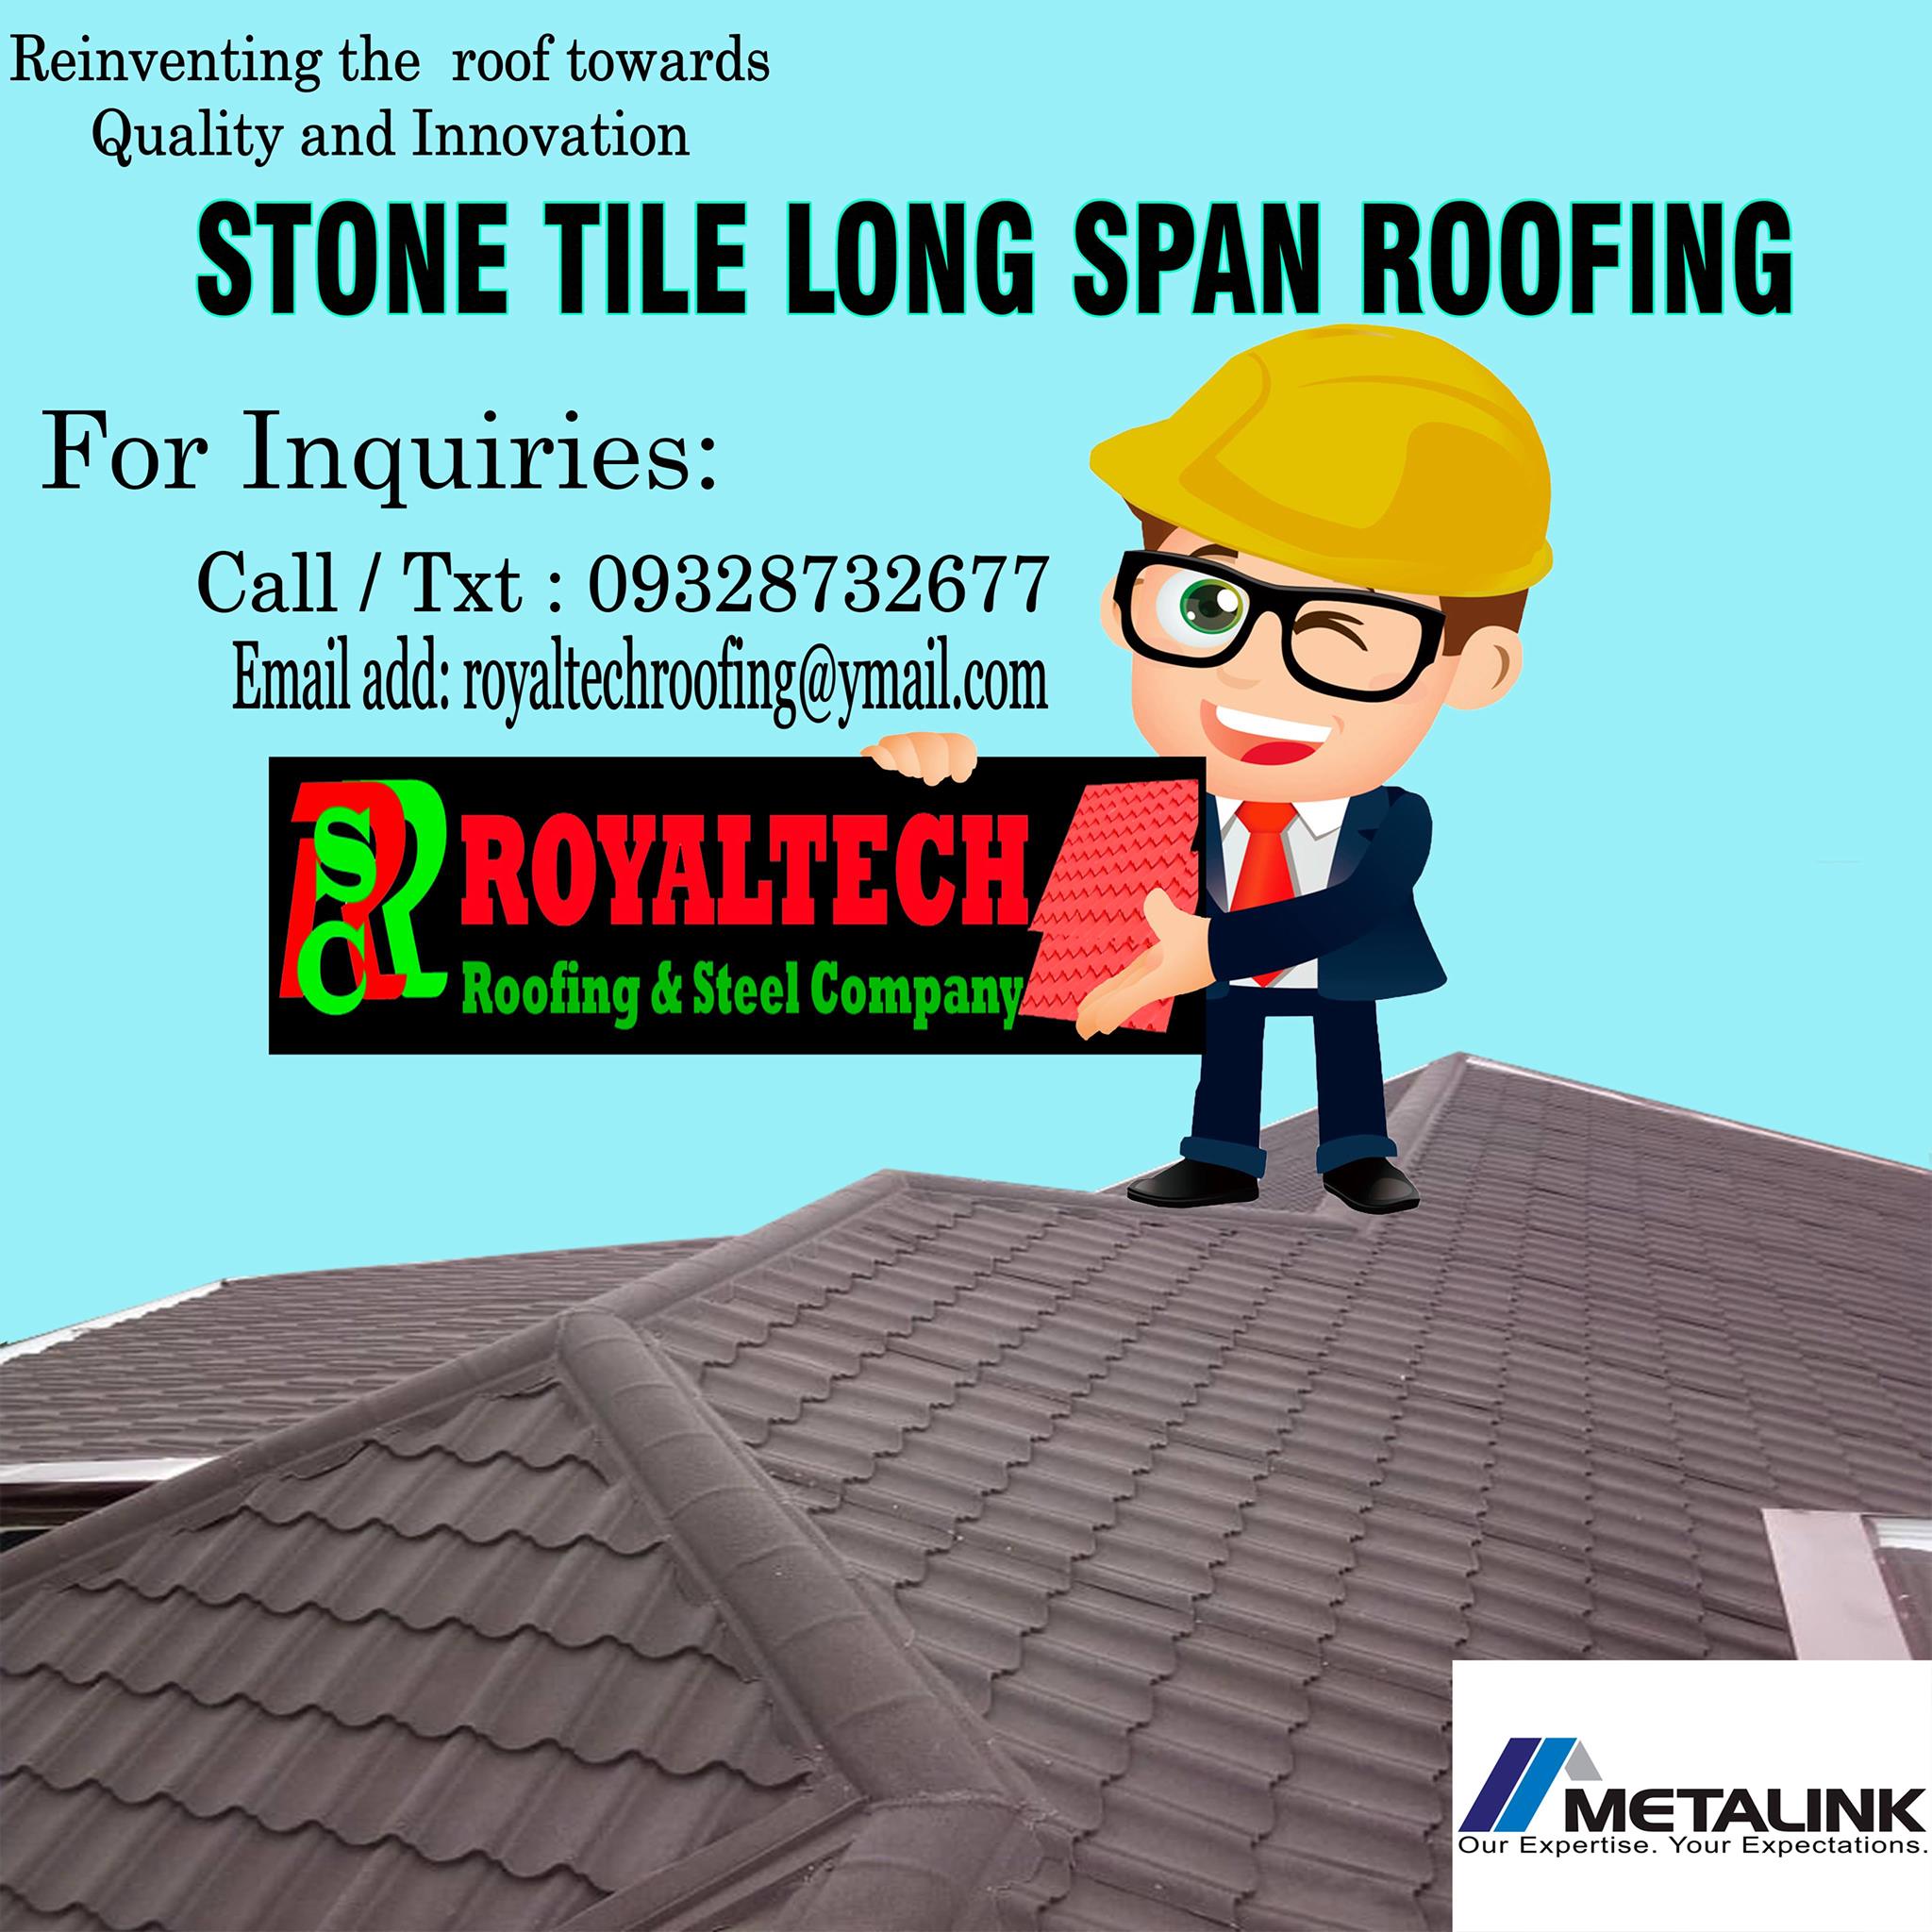 Royaltech Roofing & Steel Company 3